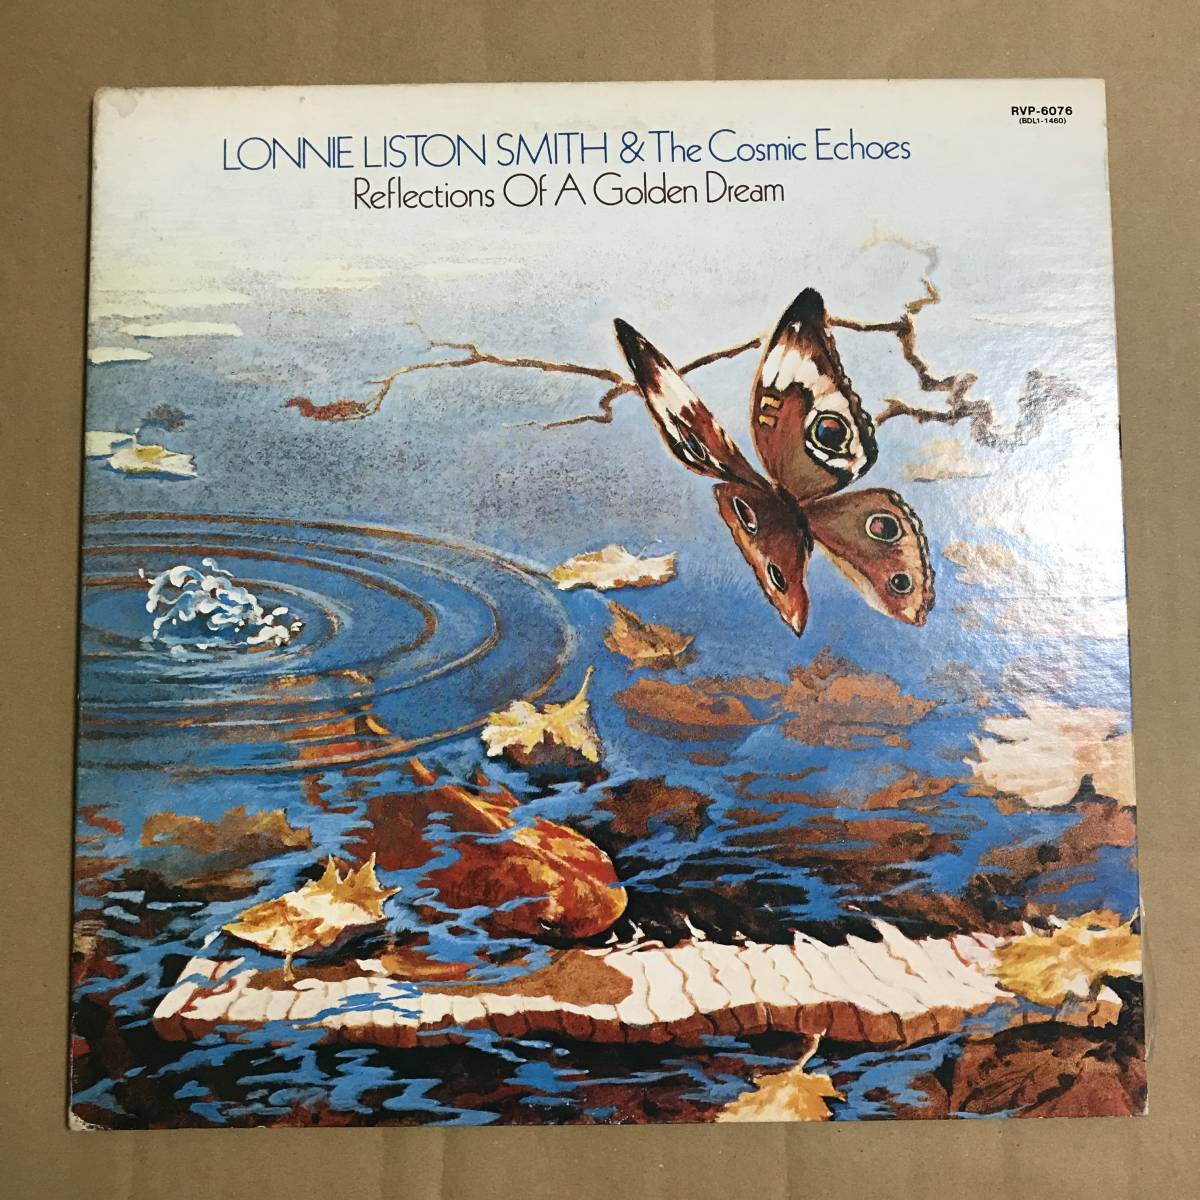 Lonnie Liston Smith And The Cosmic Echoes Reflections Of A Golden Dream / Flying Dutchman RVP-6076 / LP / JP_画像1